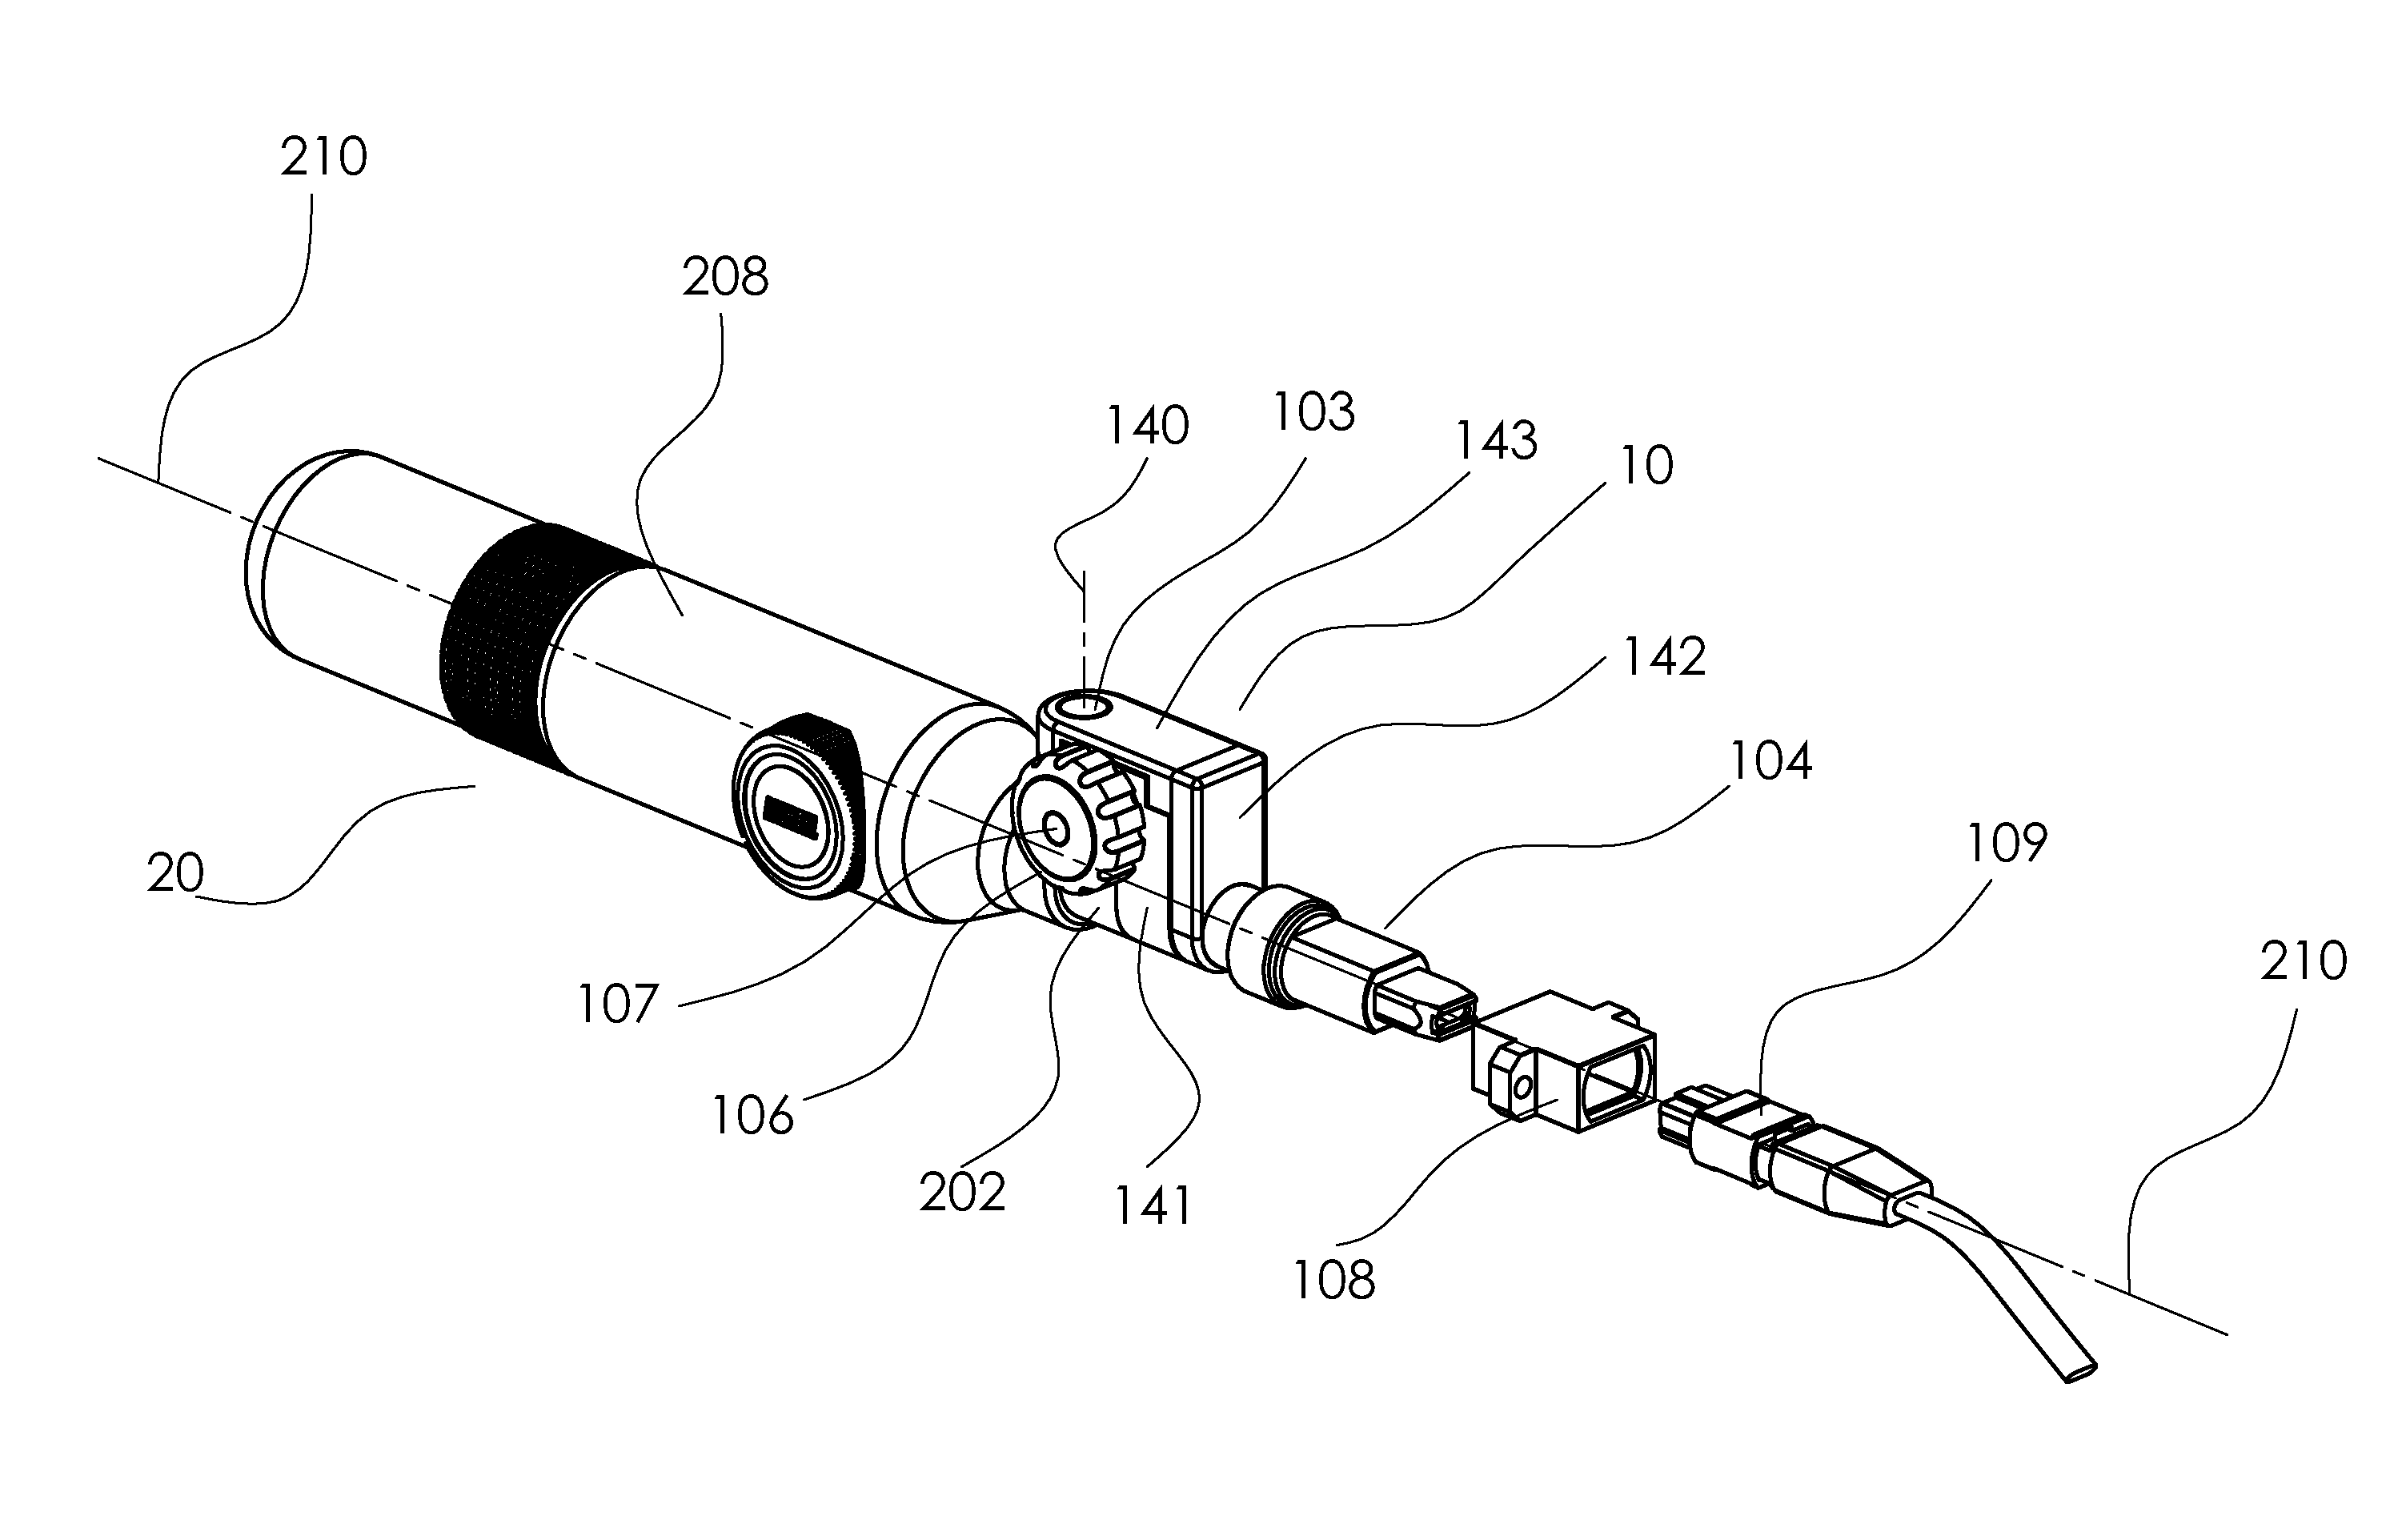 Adaptive device for shifting imaging axis across fiber-optic endfaces in multi-fiber connector for inspection